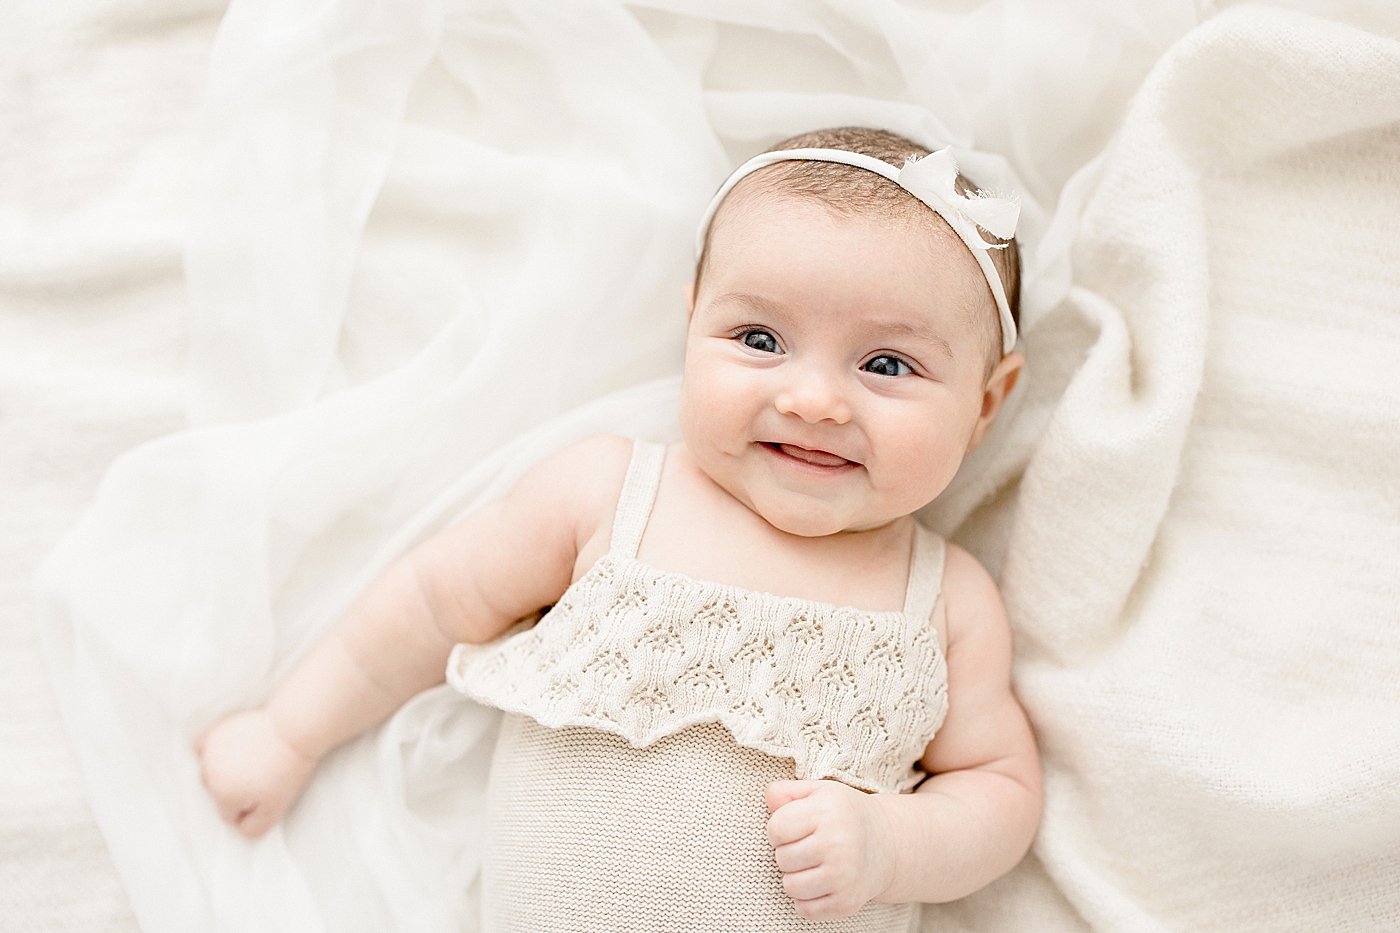 3 month milestone session. Photo by Brittany Elise Photography.